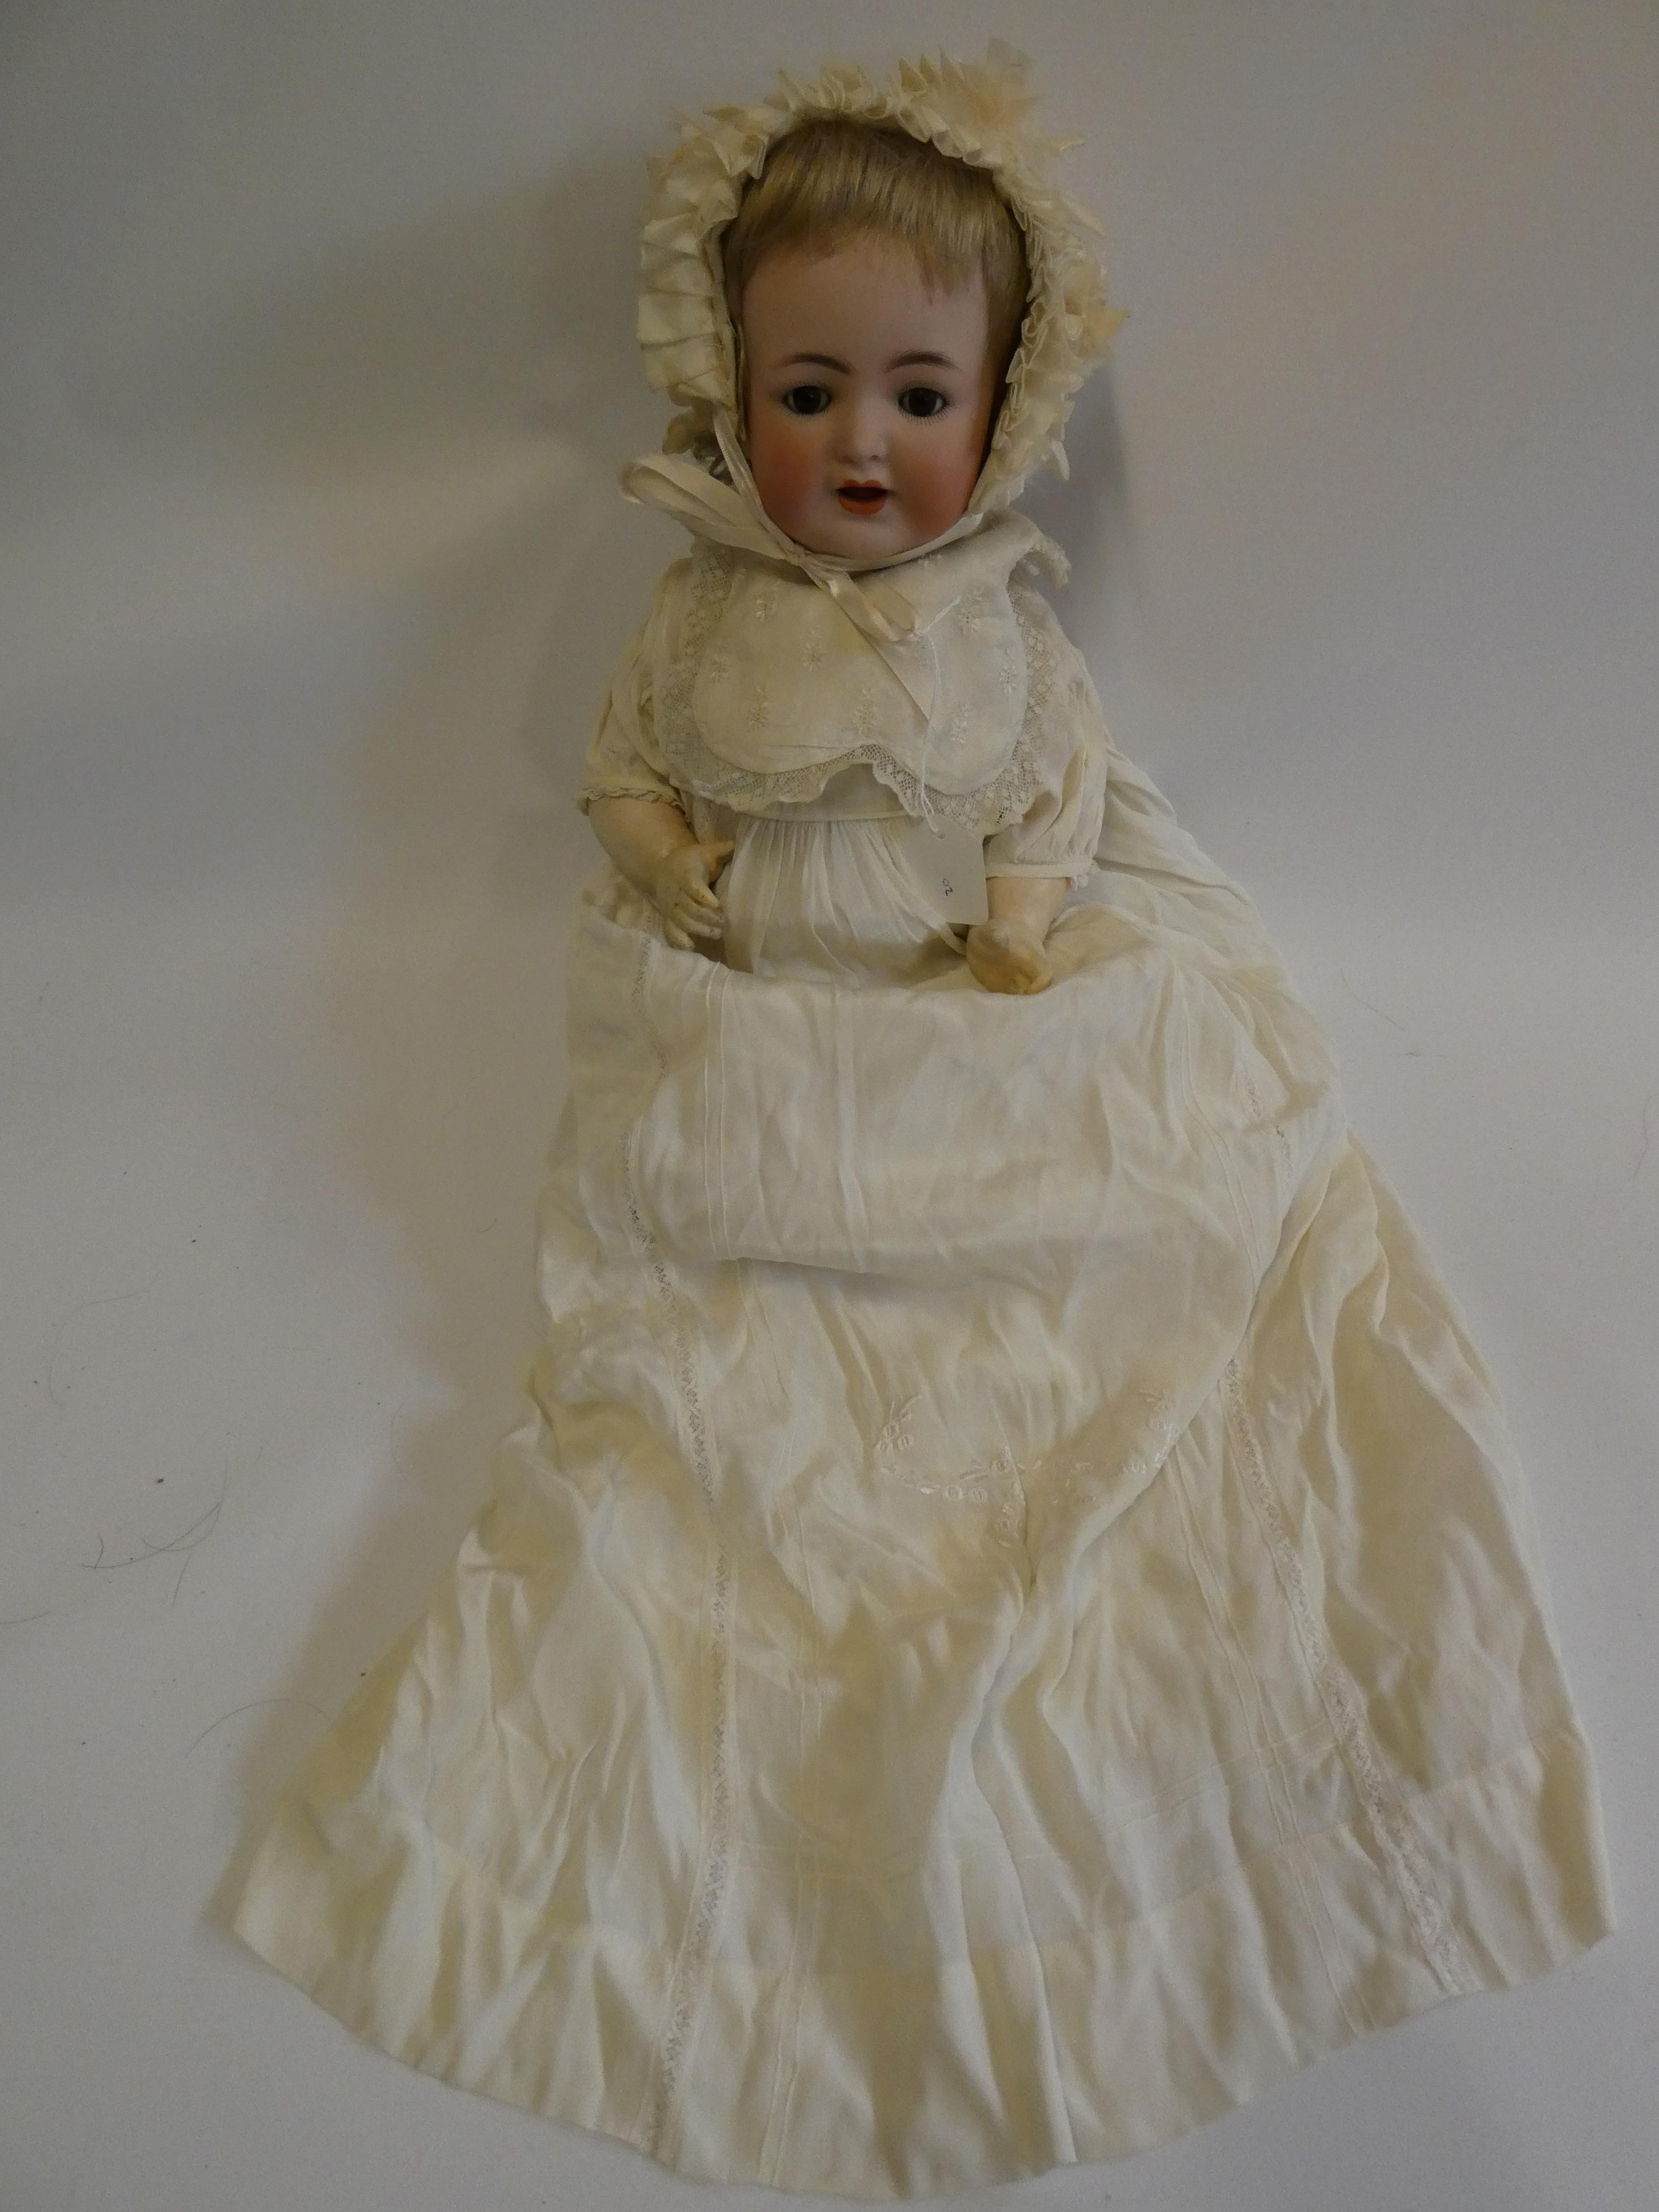 A Kammer & Reinhardt bisque socket head character doll, with brown glass sleeping eyes, open